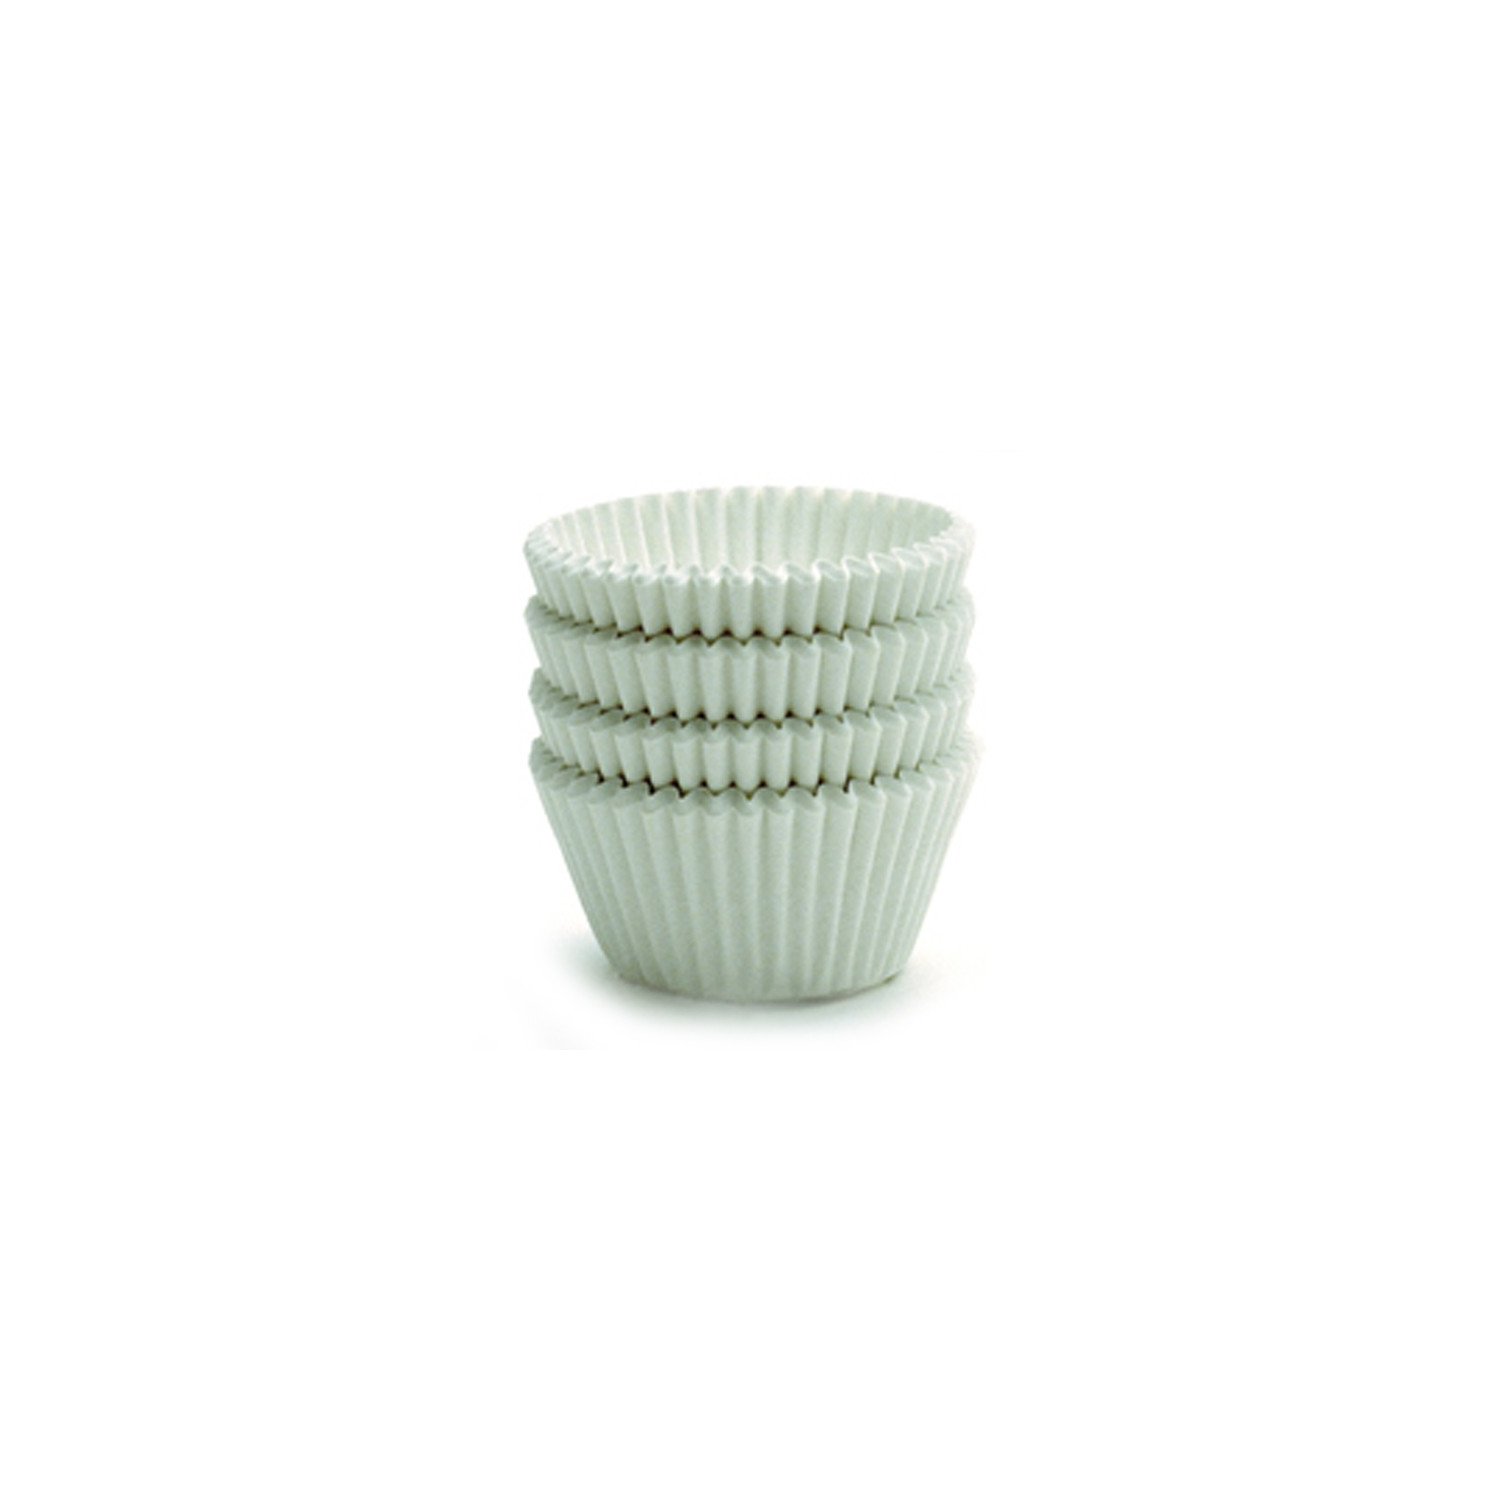 Norpro Giant Muffin Cups, White, Pack of 500, 2.75 x 2 inches (3600B)